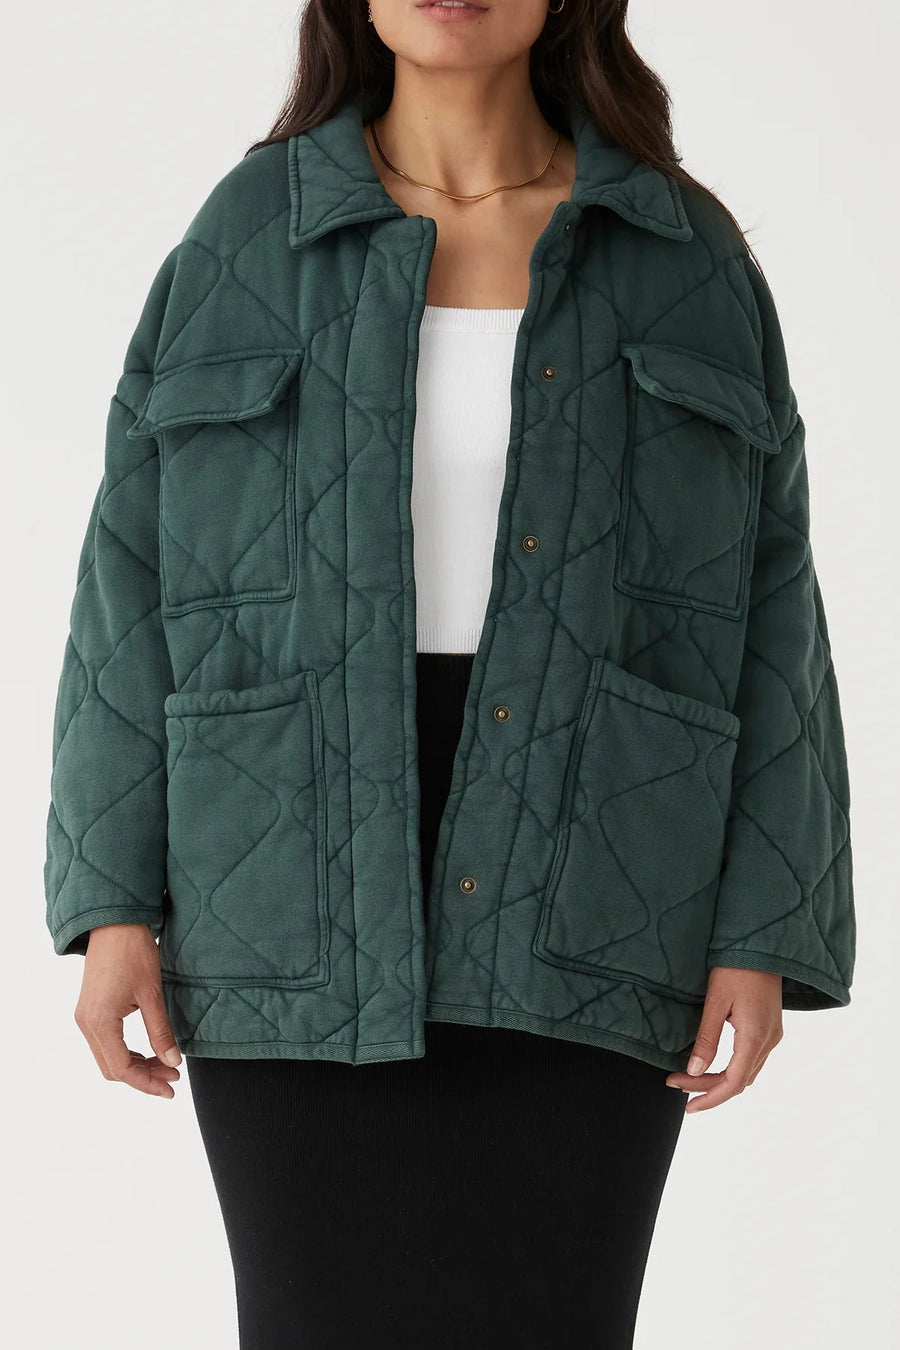 Sia Jacket in Forest